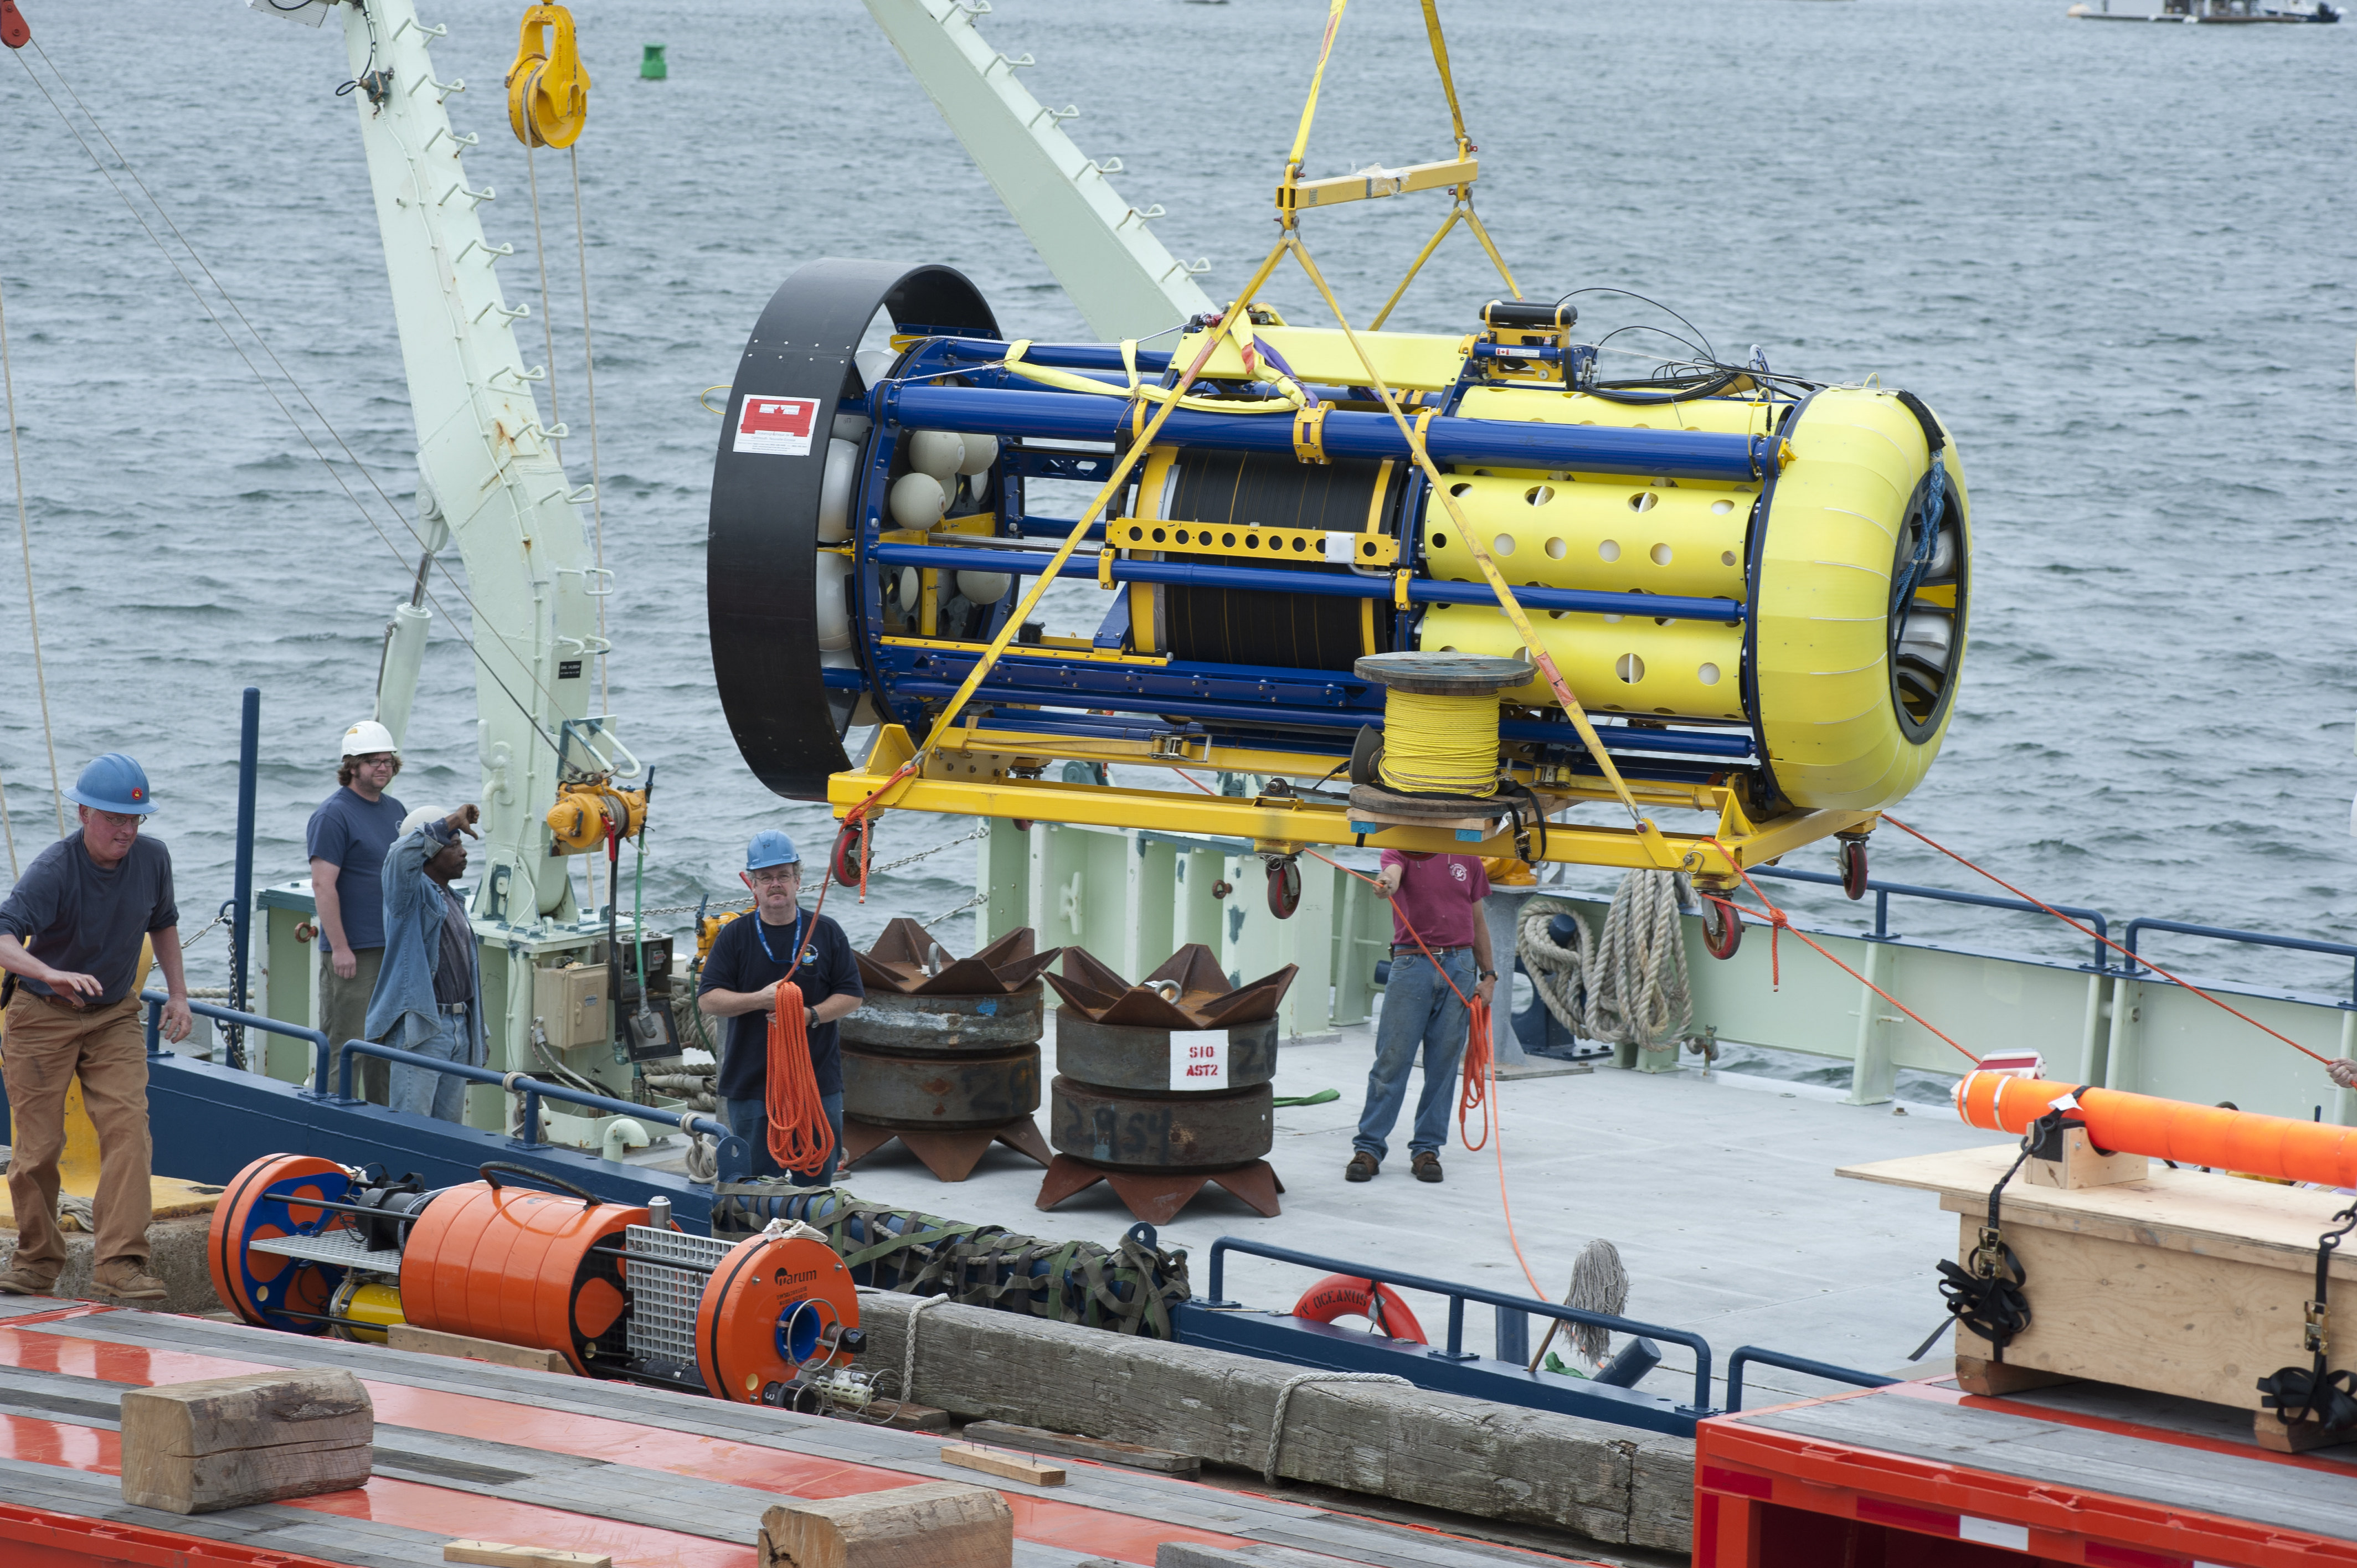 The Ocean Observatories Initiative team loads the Global Hybrid Profiler on Research Vessel Oceanus for the At Sea Test off the New England Coast.  (Credit: Tom Kleindinst, Woods Hole Oceanographic Institution)